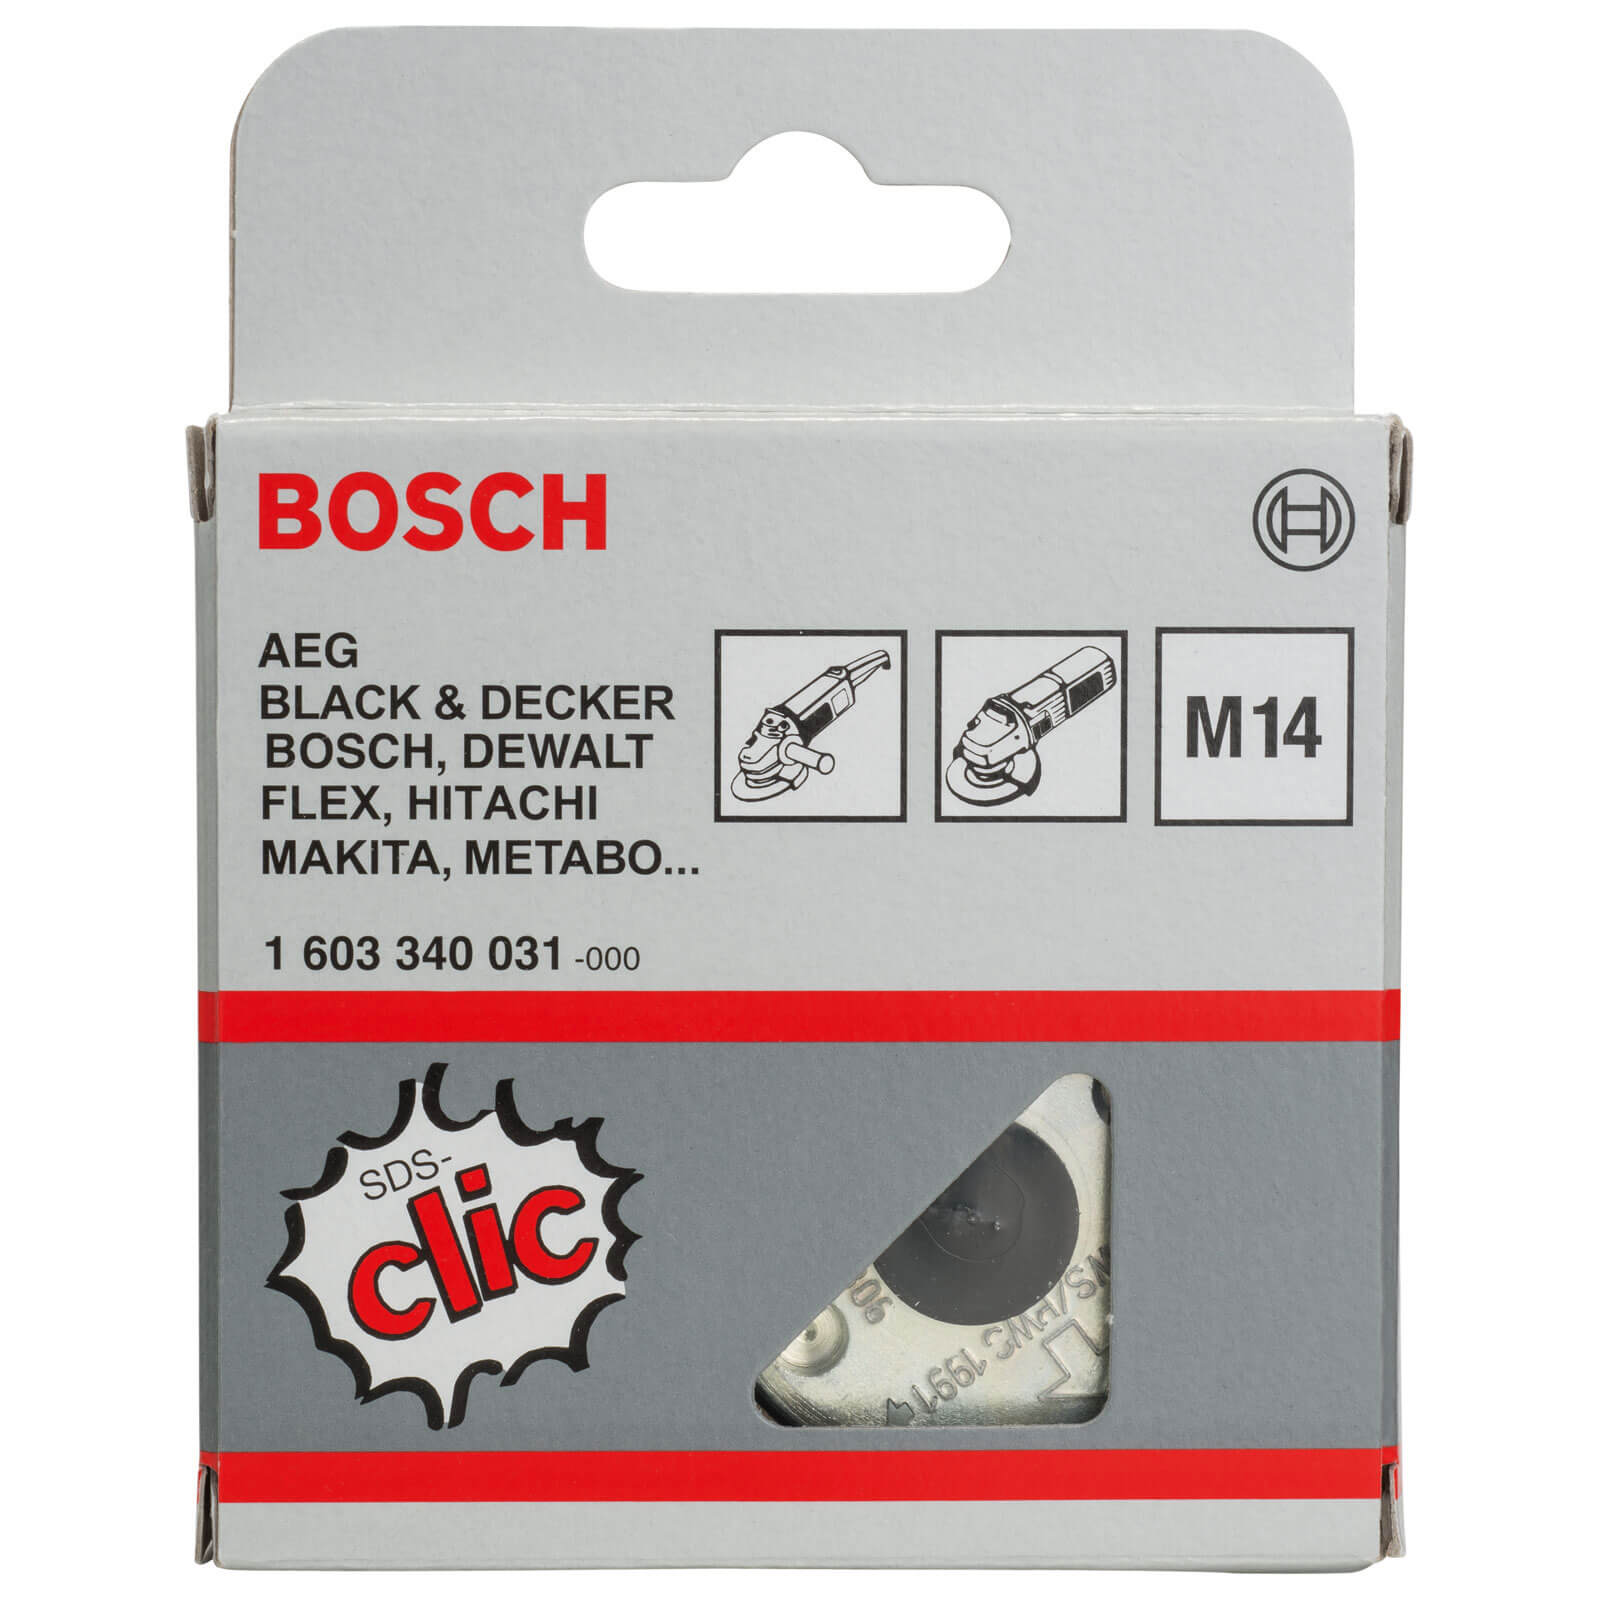 Bosch Professional 3x Professional Quick Release Nut M14 Screw For Bosch Metabo Angle Grinder Parts 